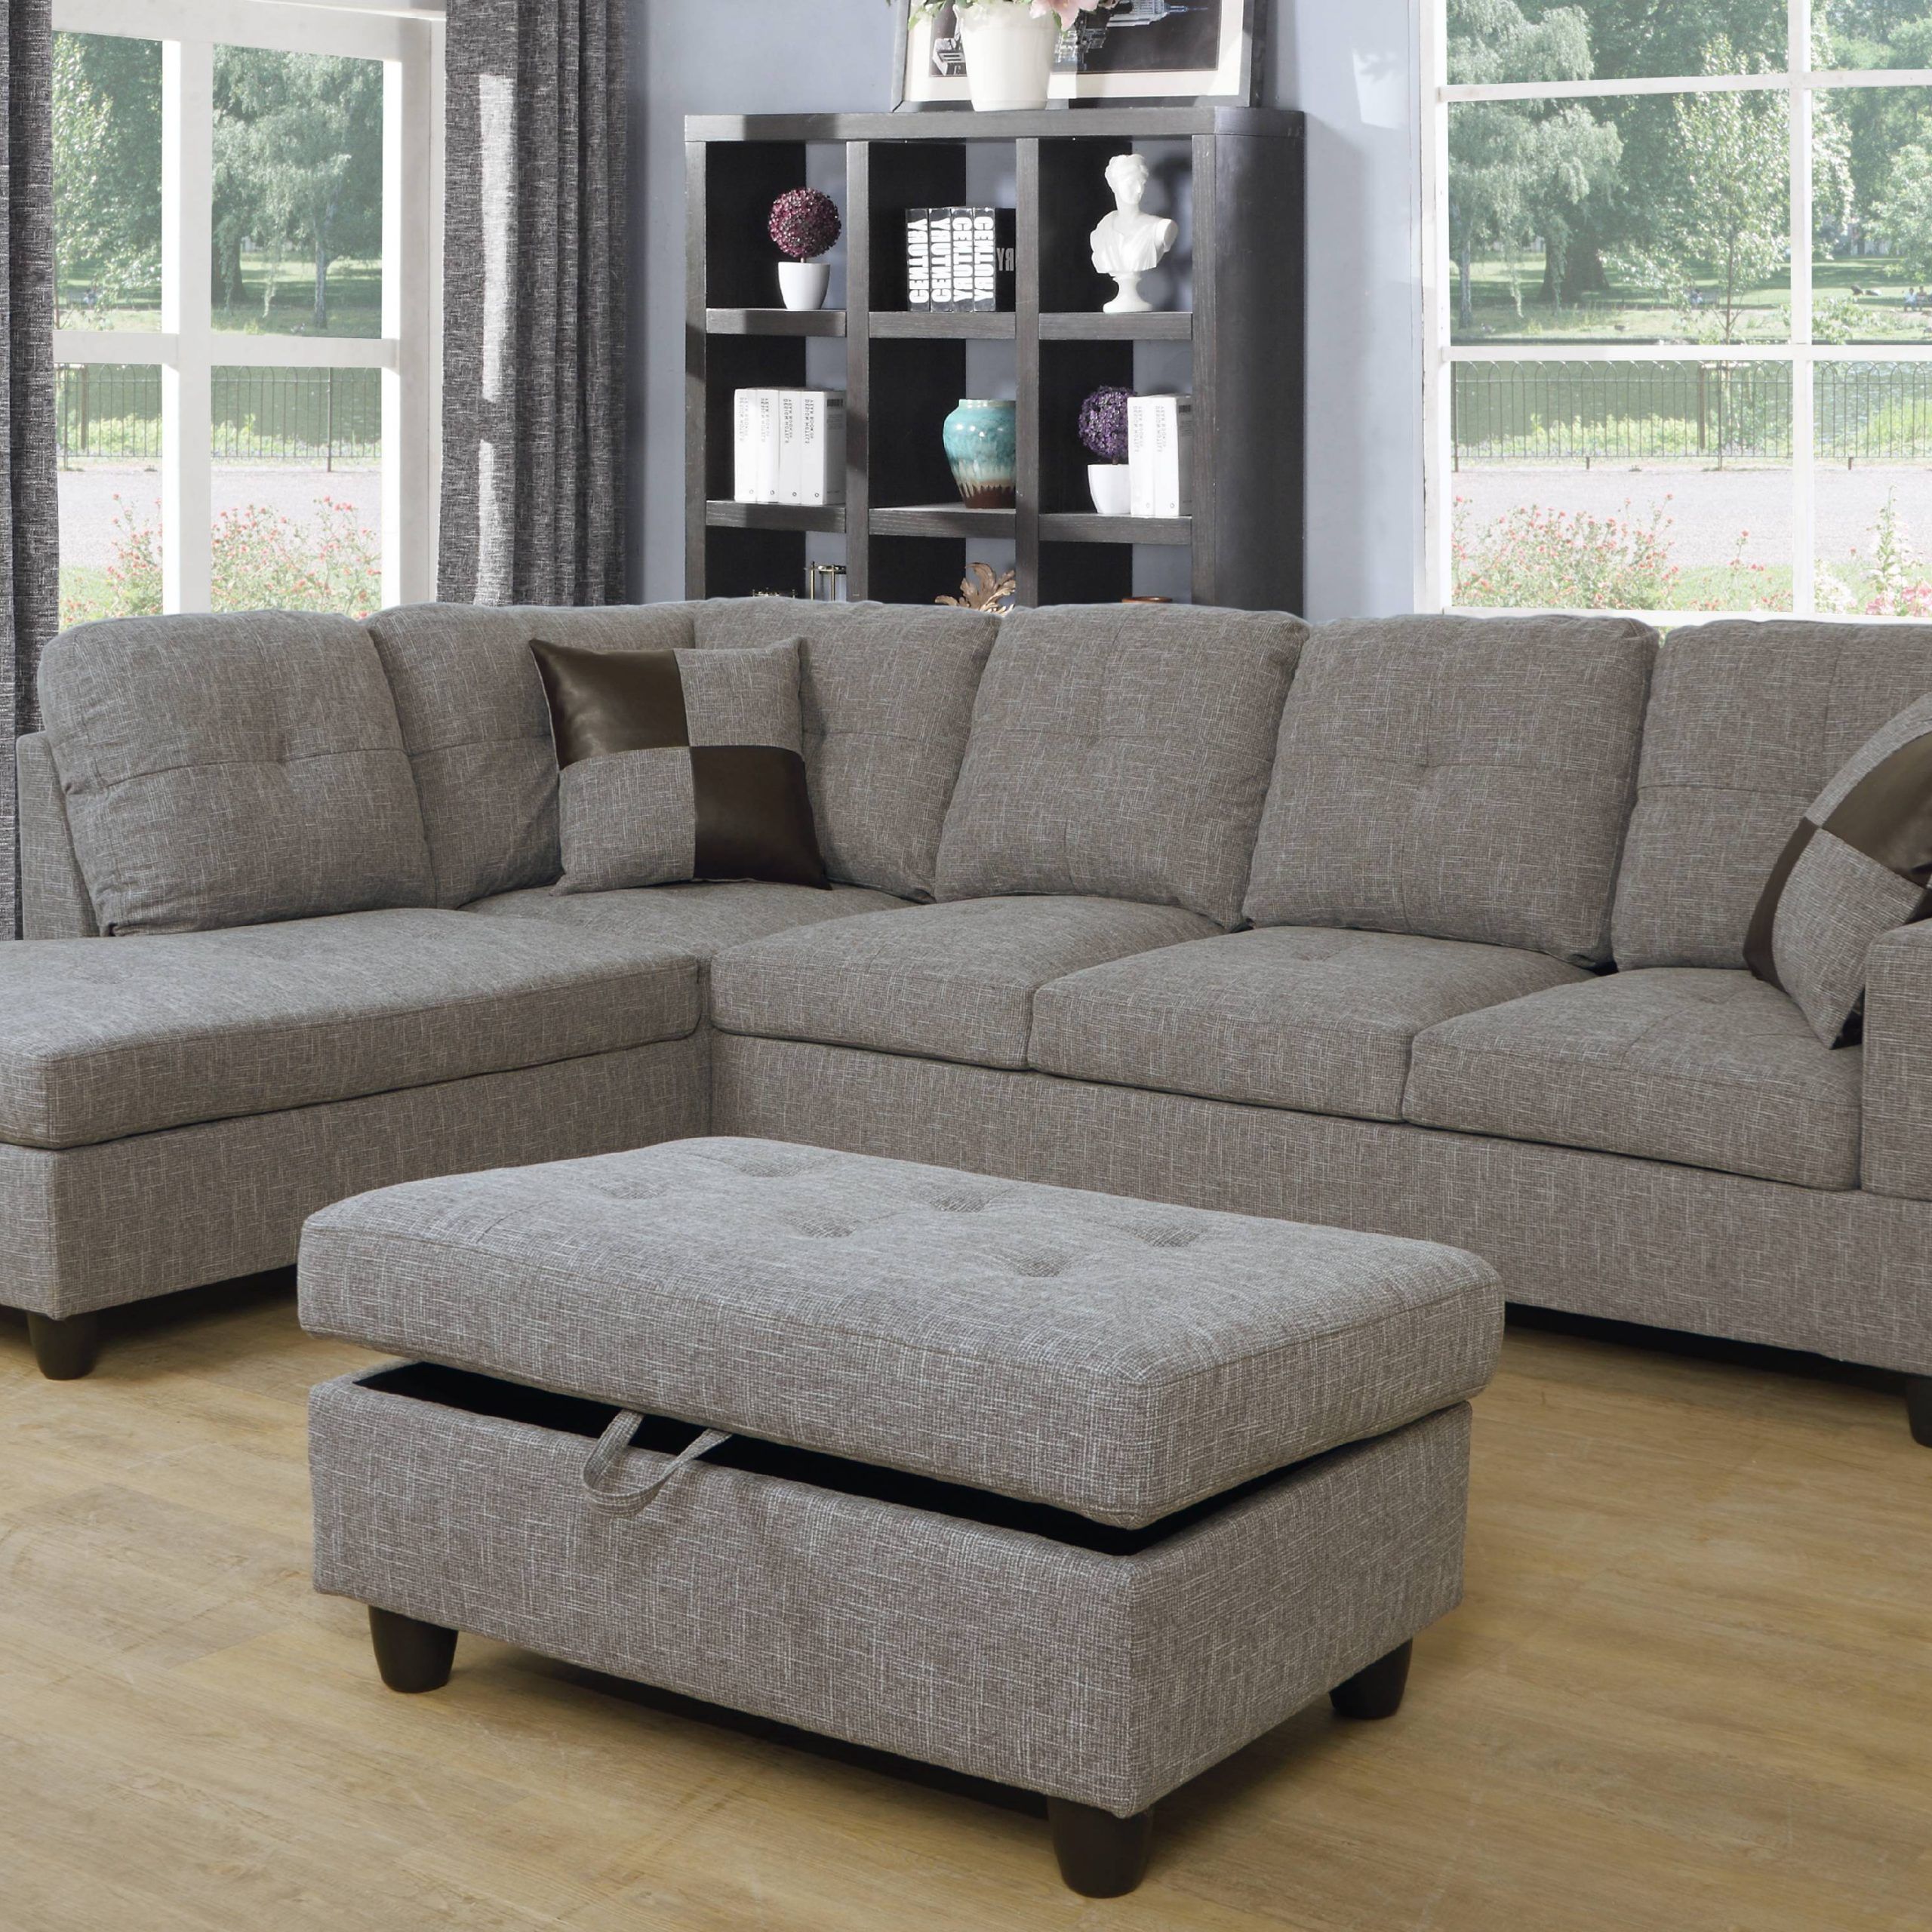 Ponliving Furniture L Shape Sectional Sofa Set With Storage Ottoman Regarding Rustic Brown Sectional Corner Desks (View 2 of 15)